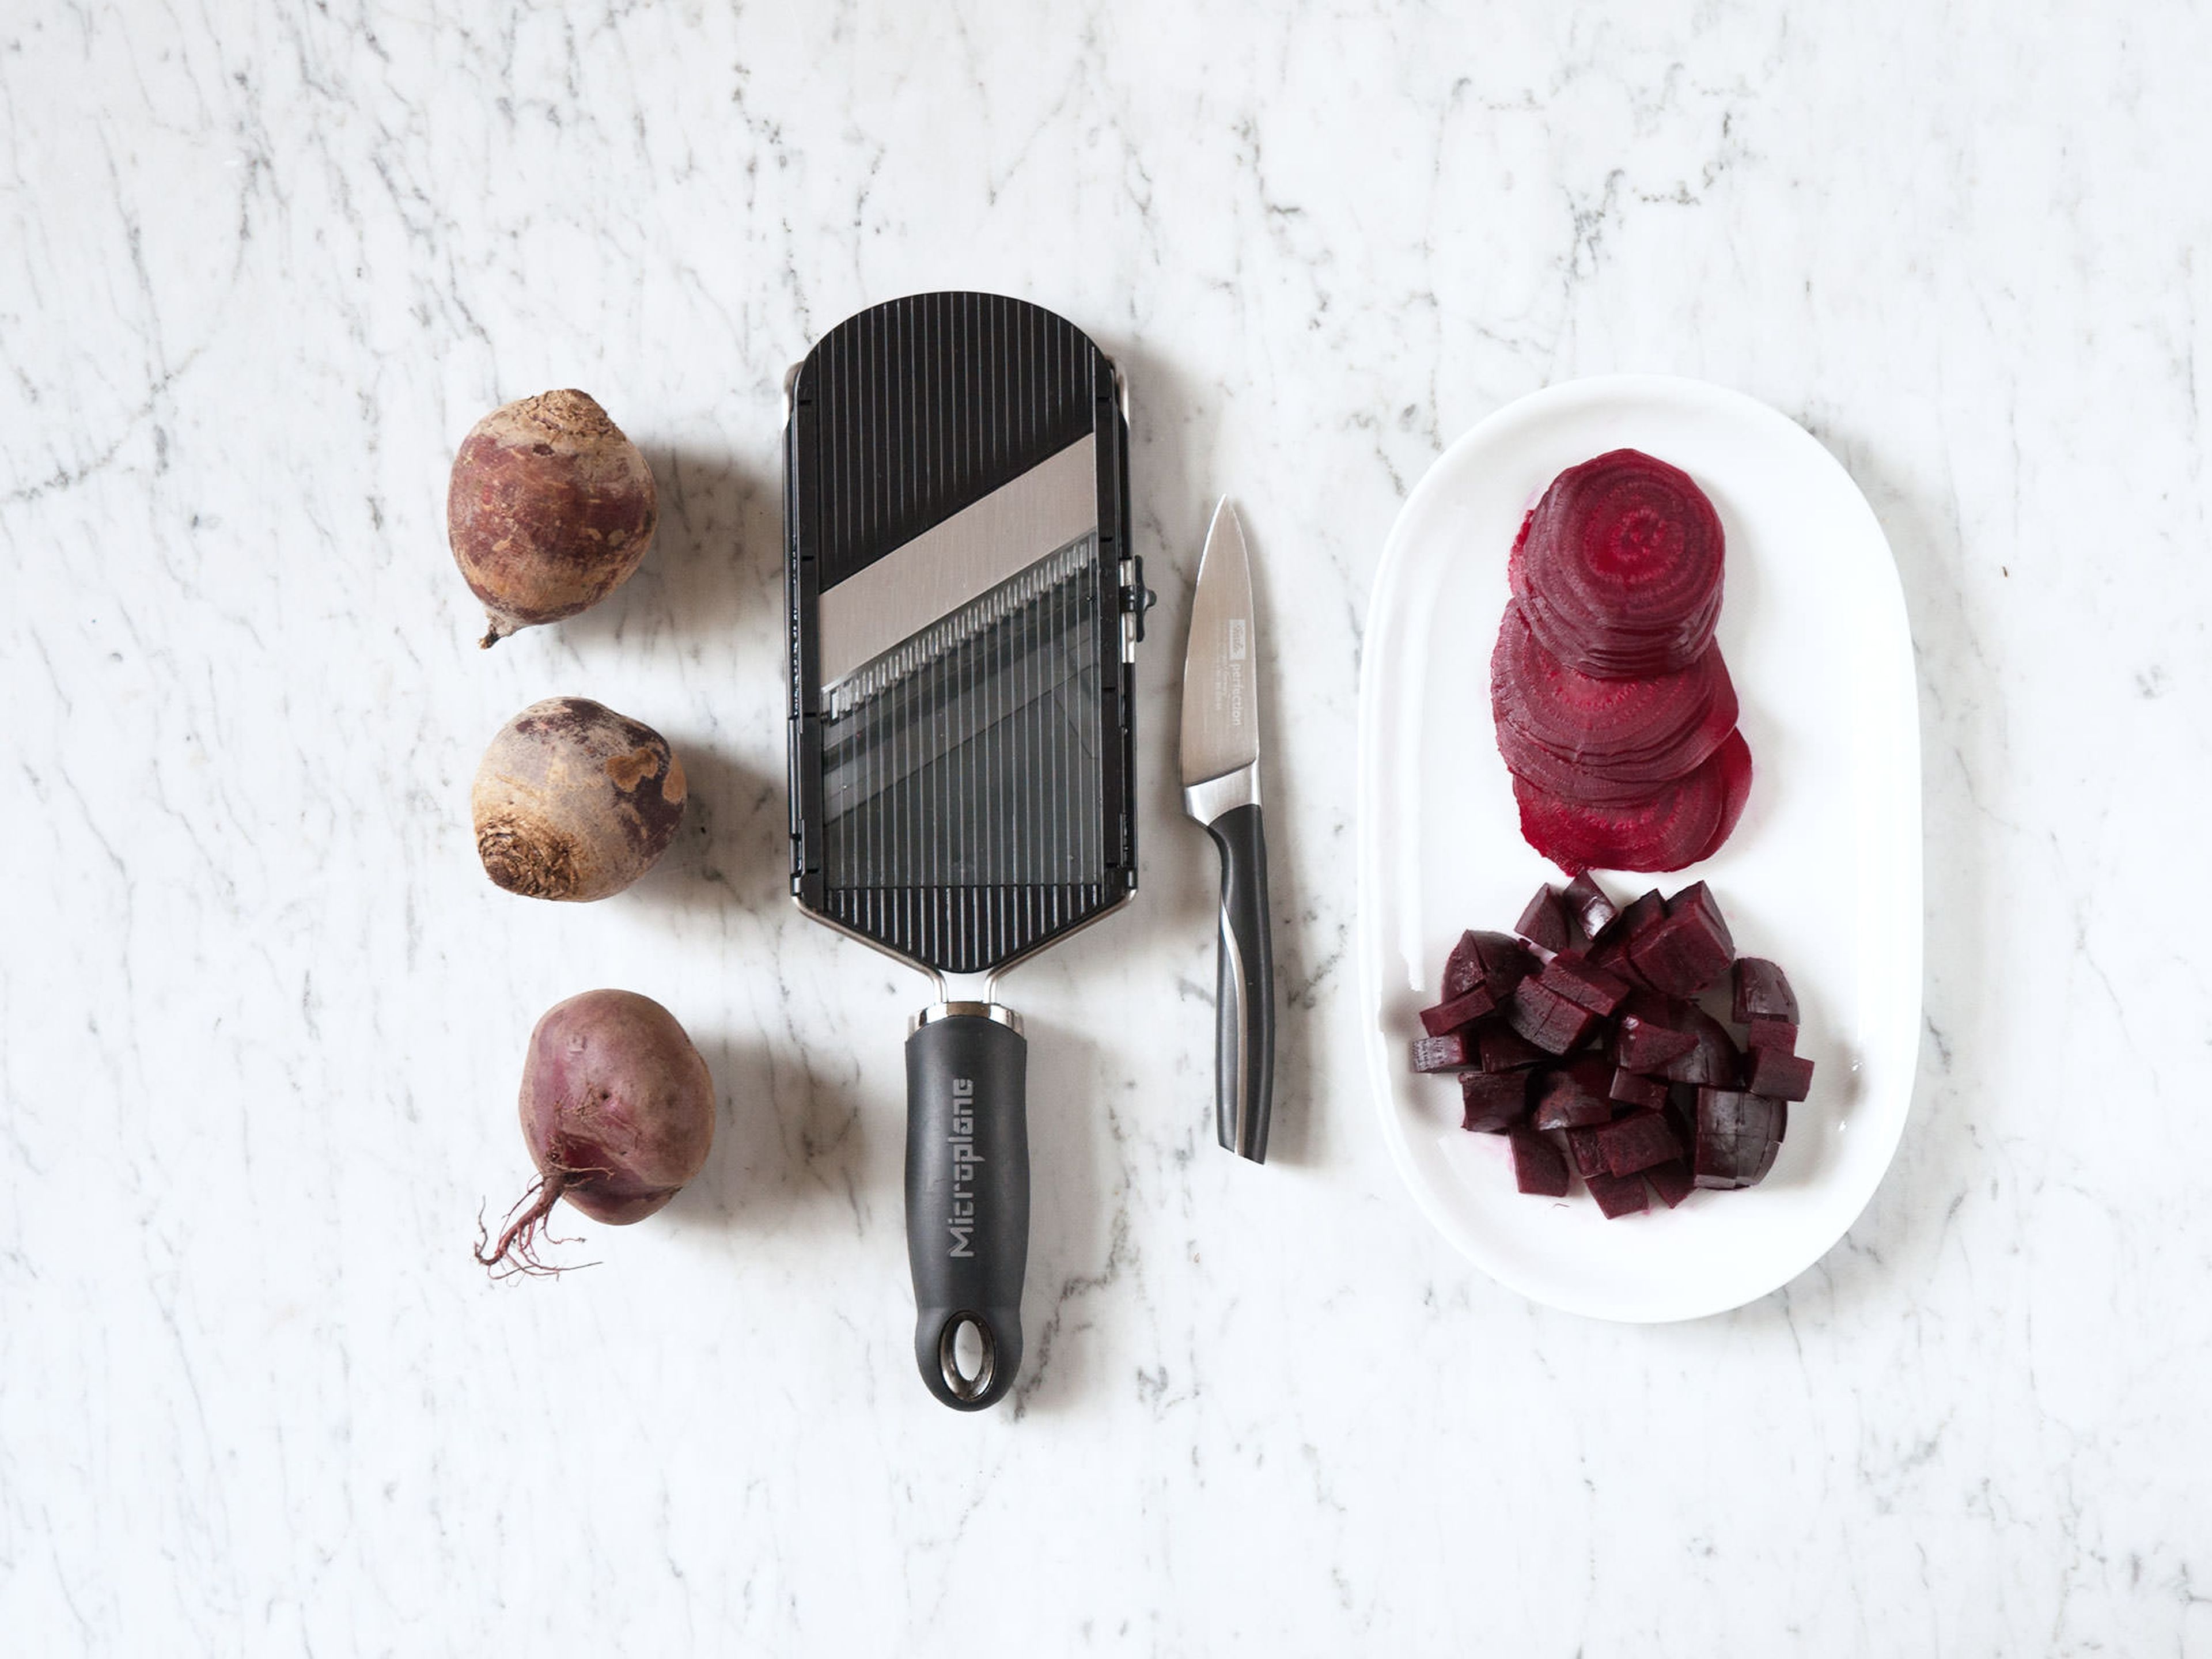 How to prepare beets